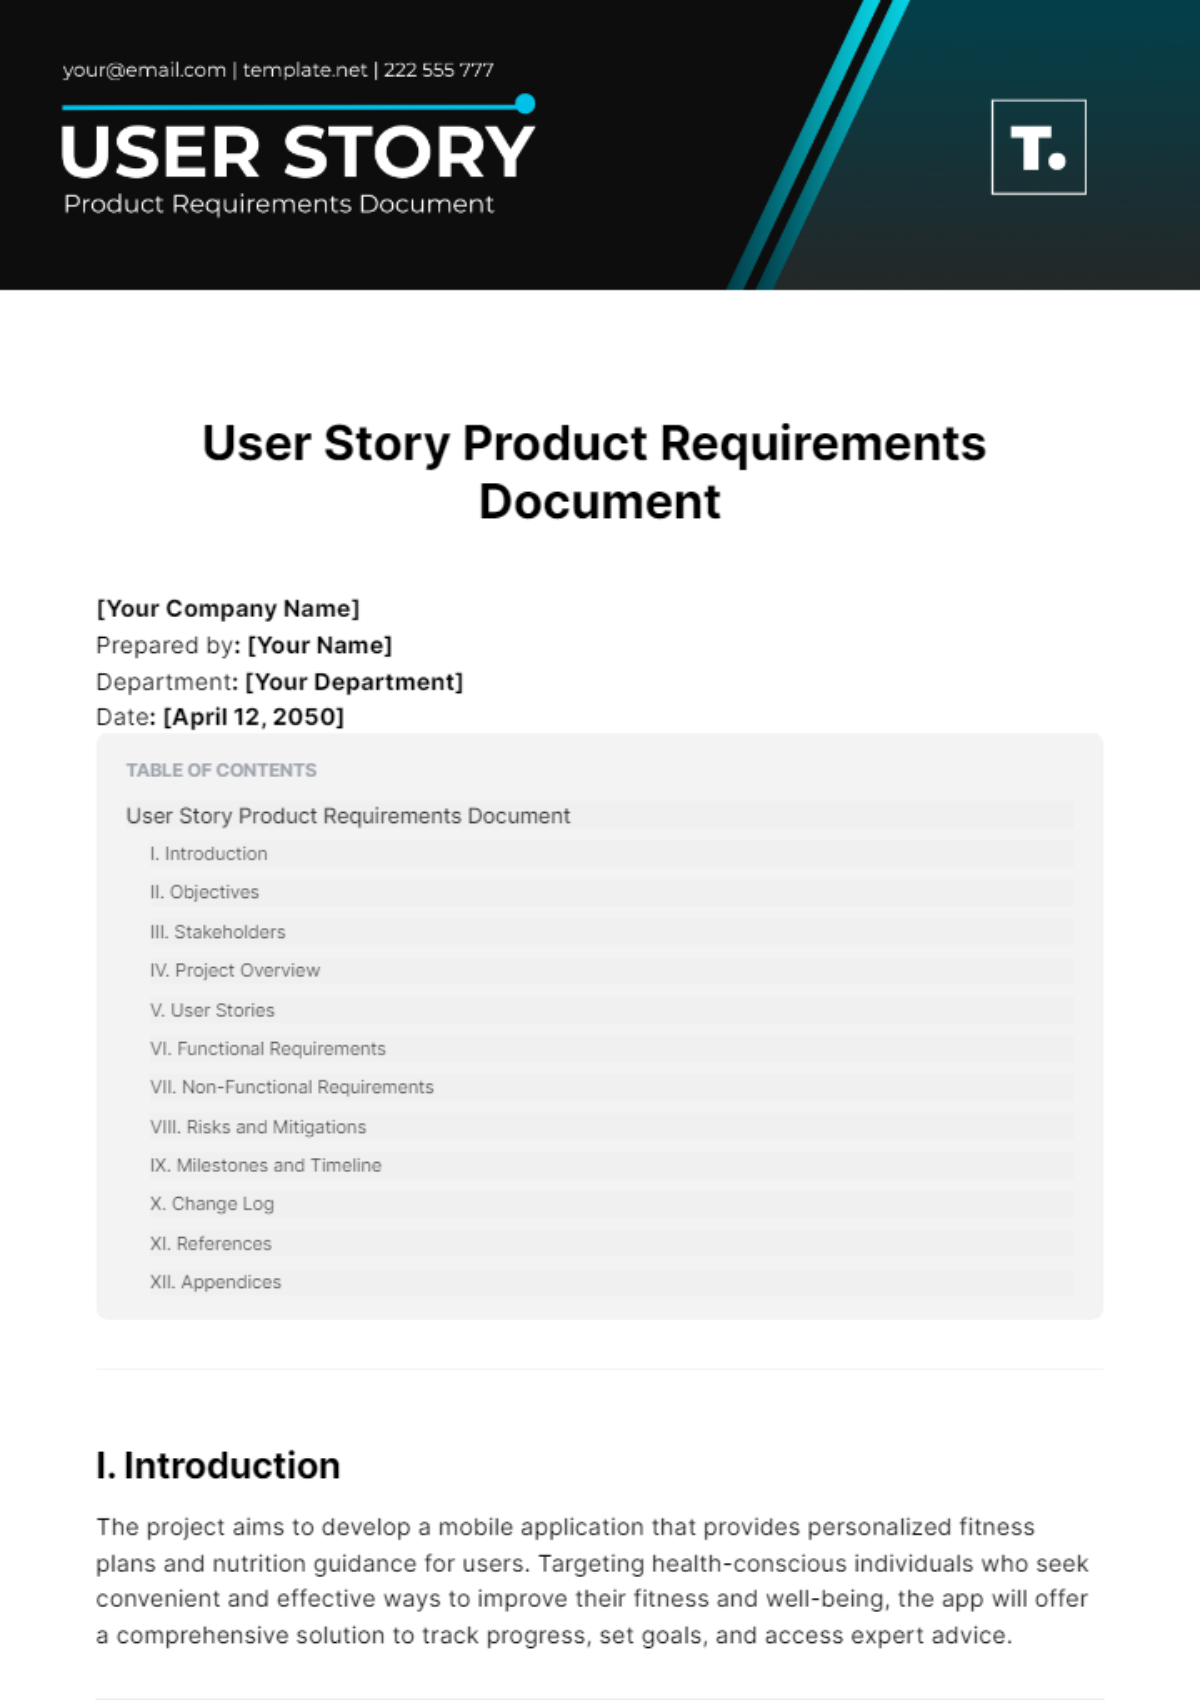 User Story Product Requirements Document Template